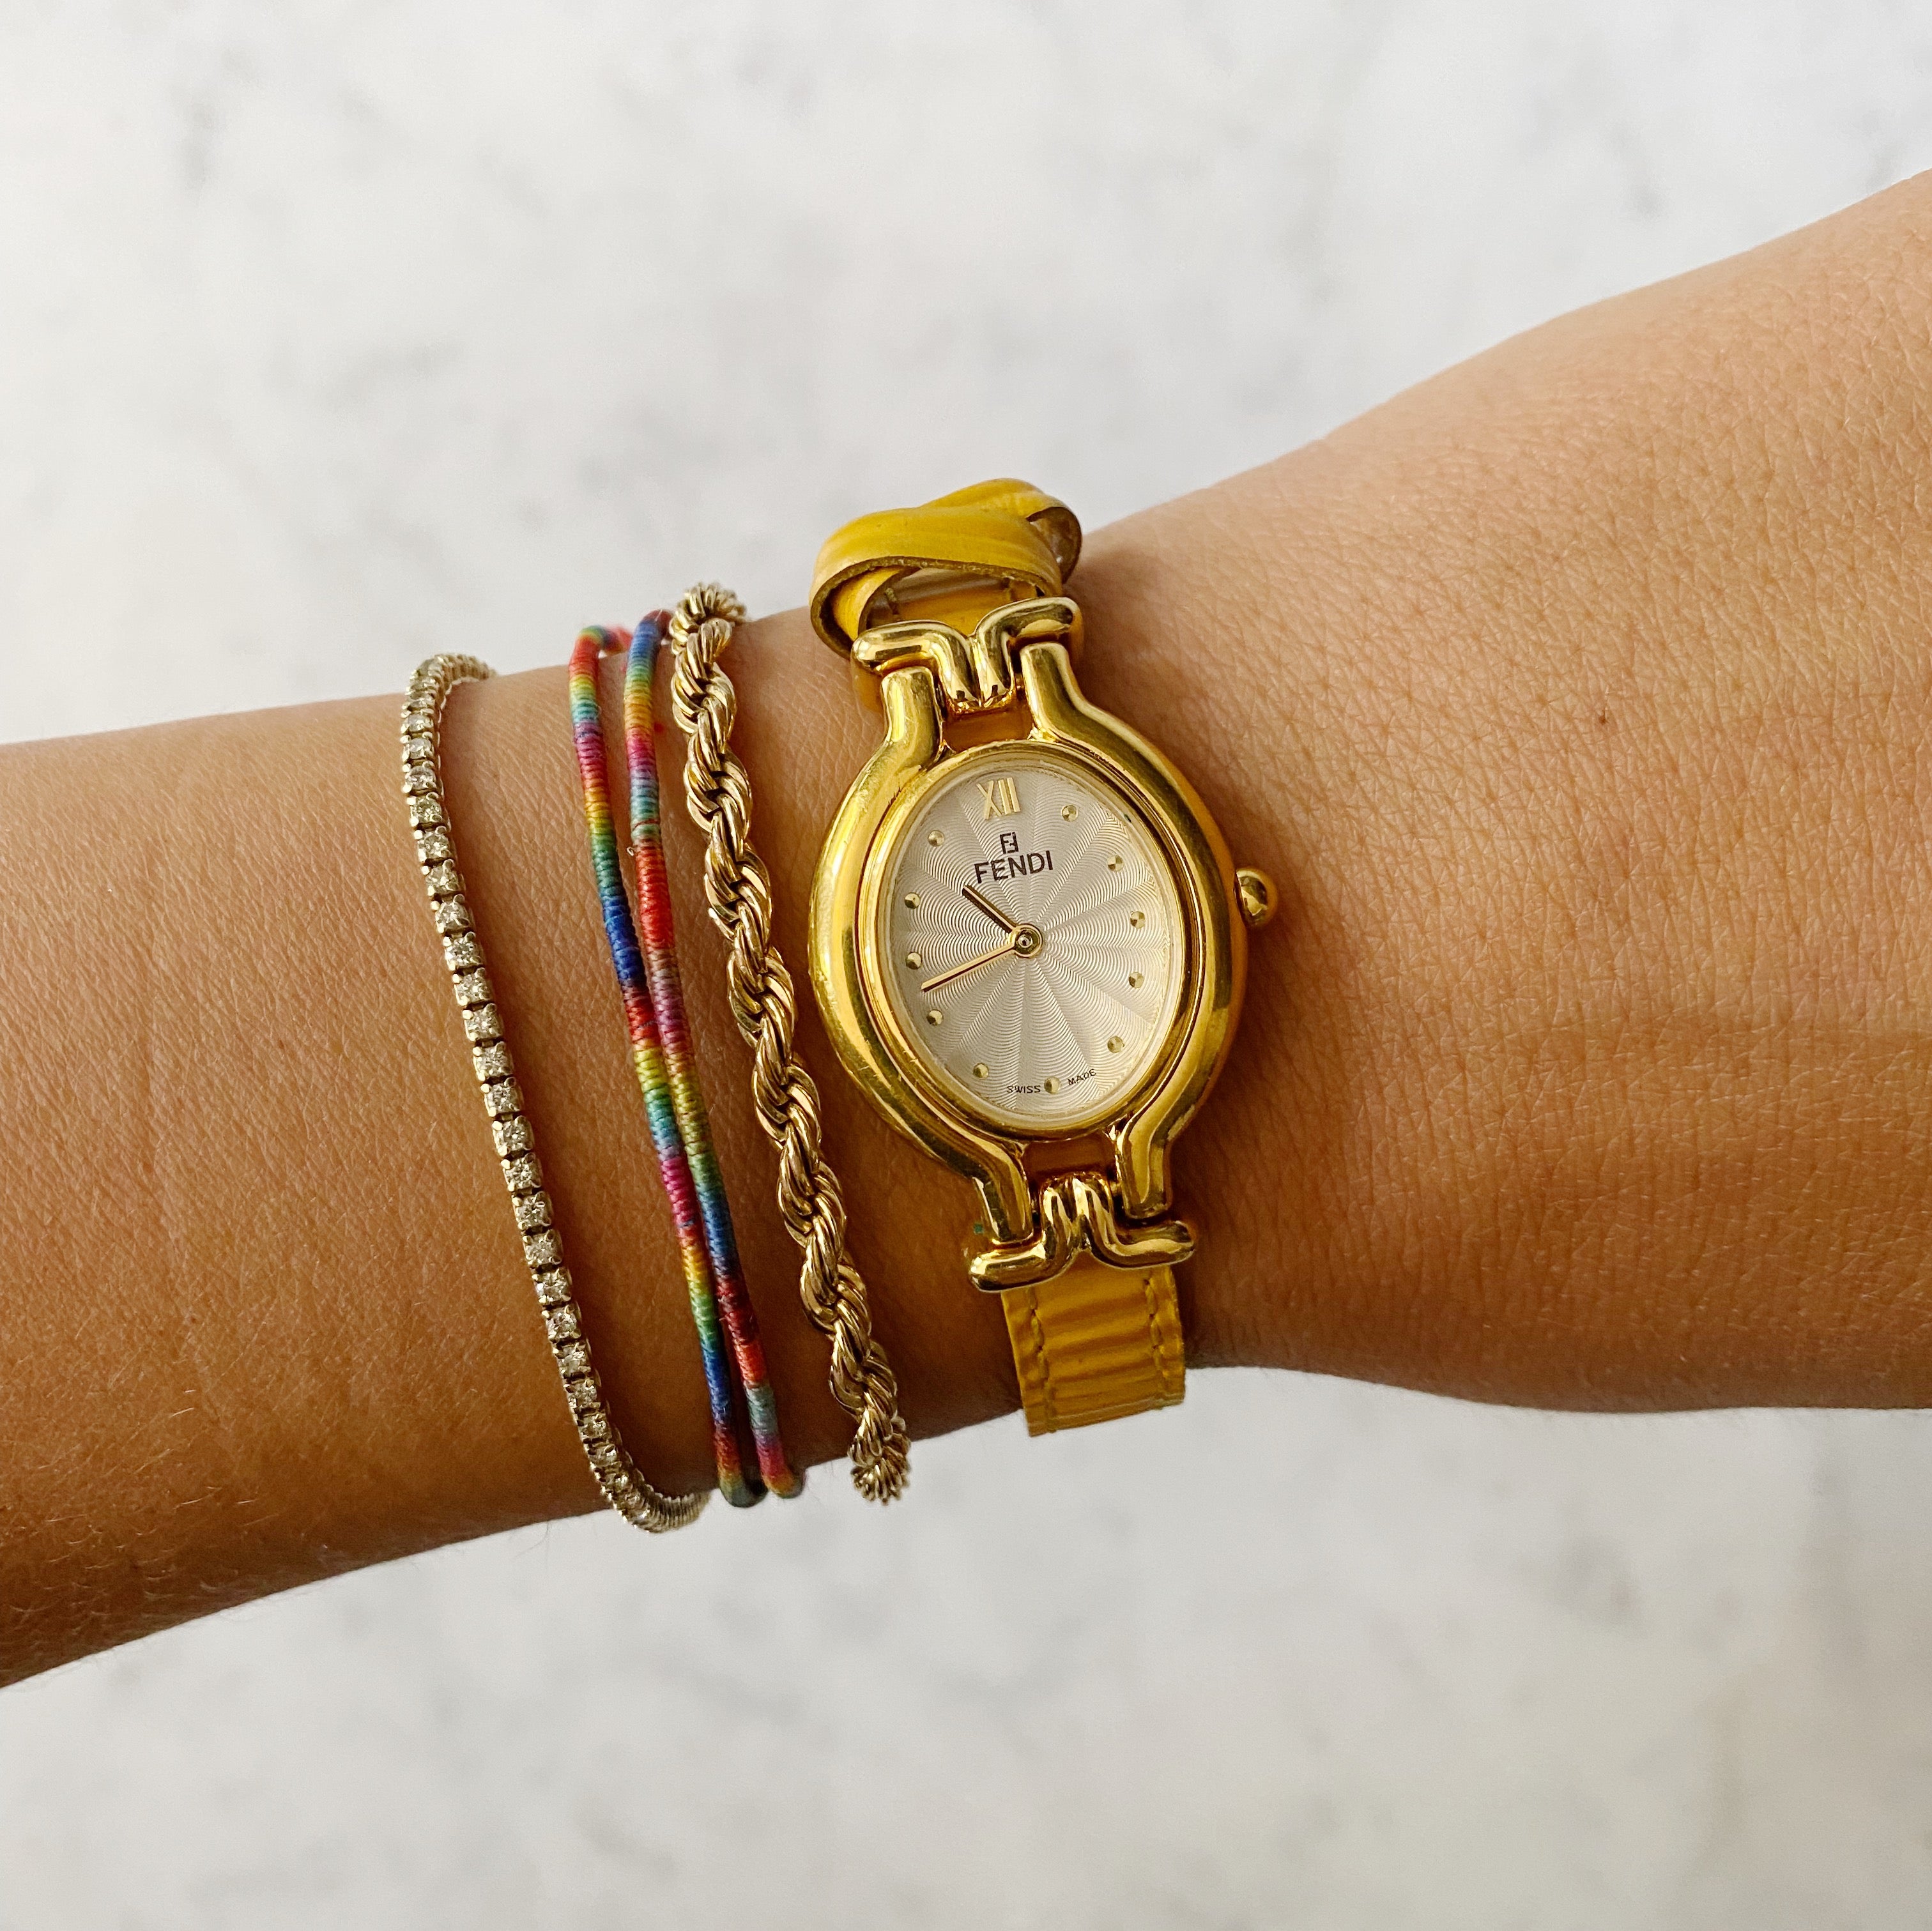 Vintage Gold Fendi Watch with Interchangeable Bands – Tarin Thomas